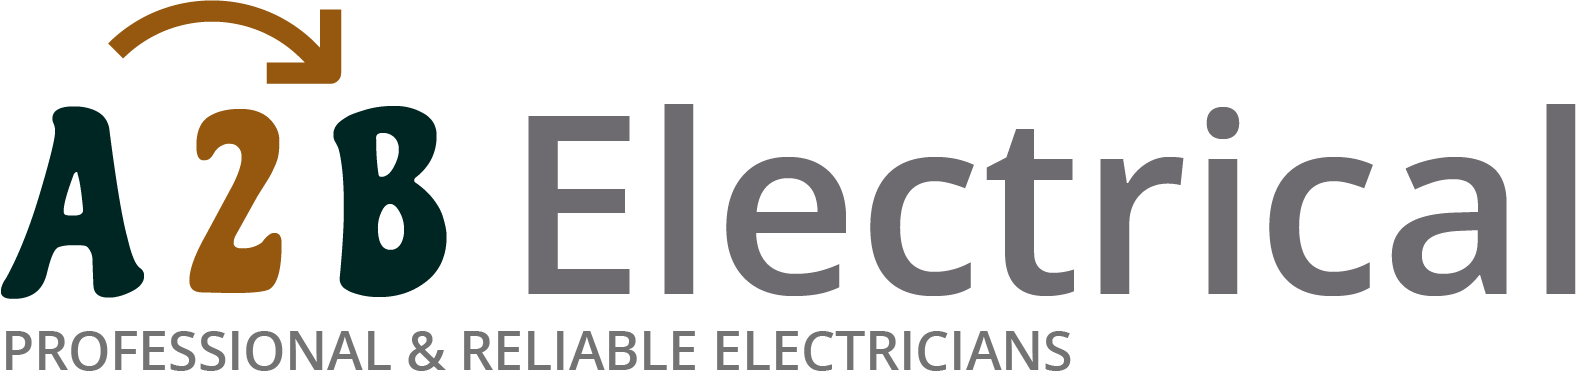 If you have electrical wiring problems in Matlock, we can provide an electrician to have a look for you. 